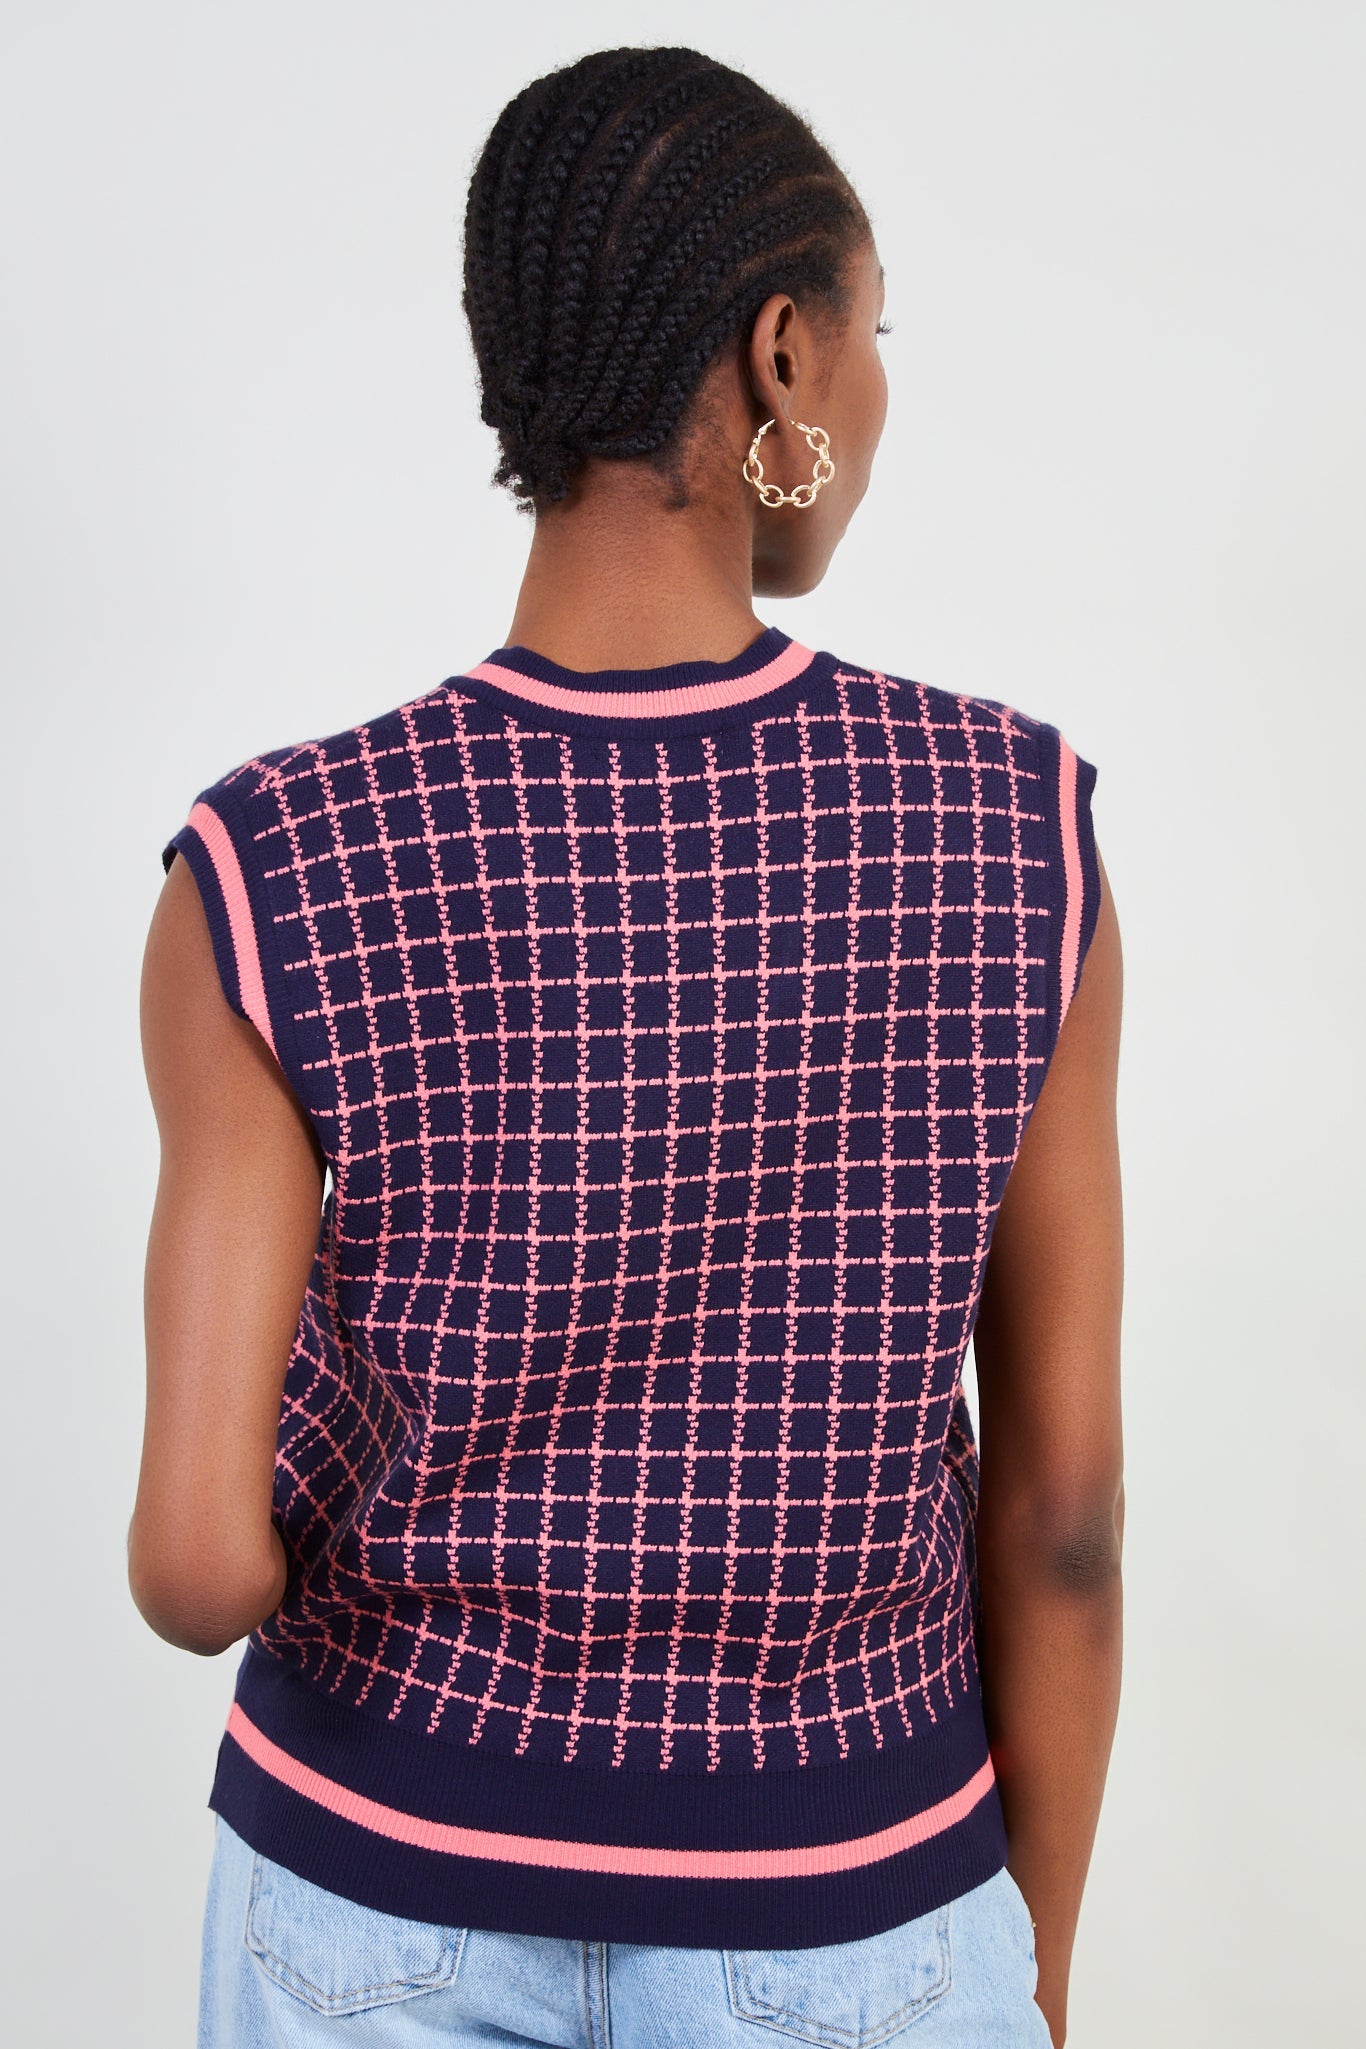 Navy and pink box check sweater vest